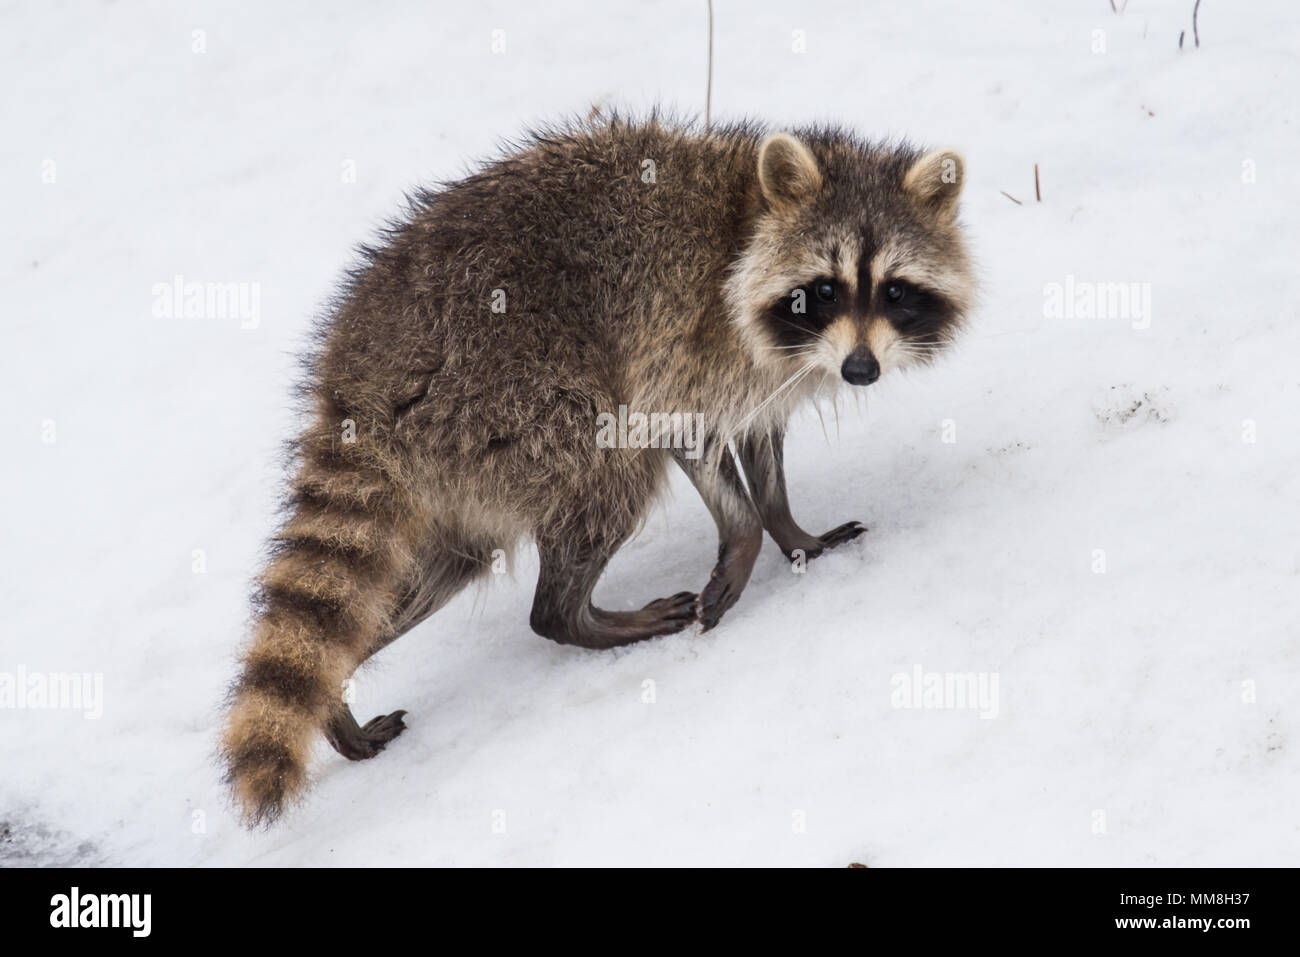 A North American Raccoon wandering in the Adirondack Mountains in winter, with a snow background. Stock Photo